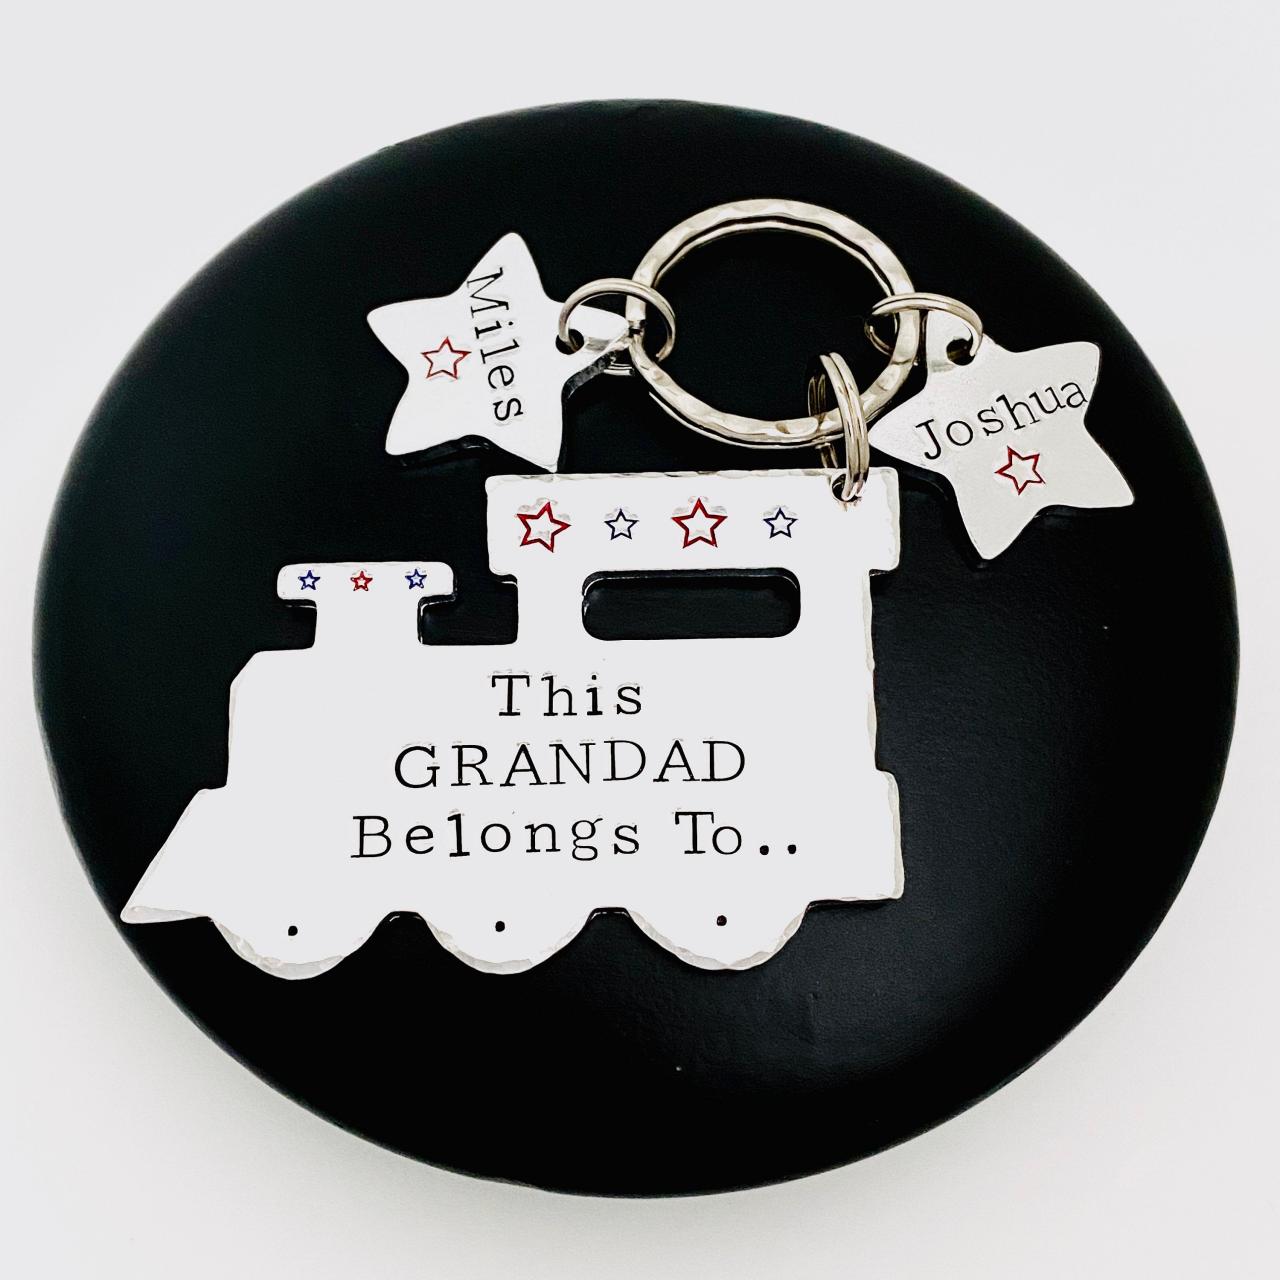 Belongs To Keyring, Gift For Grandad, Personalised Grandad Keychain, Papa Gift, Personalized Gift For Daddy, Train Lover Gift, Gift Off Kids..